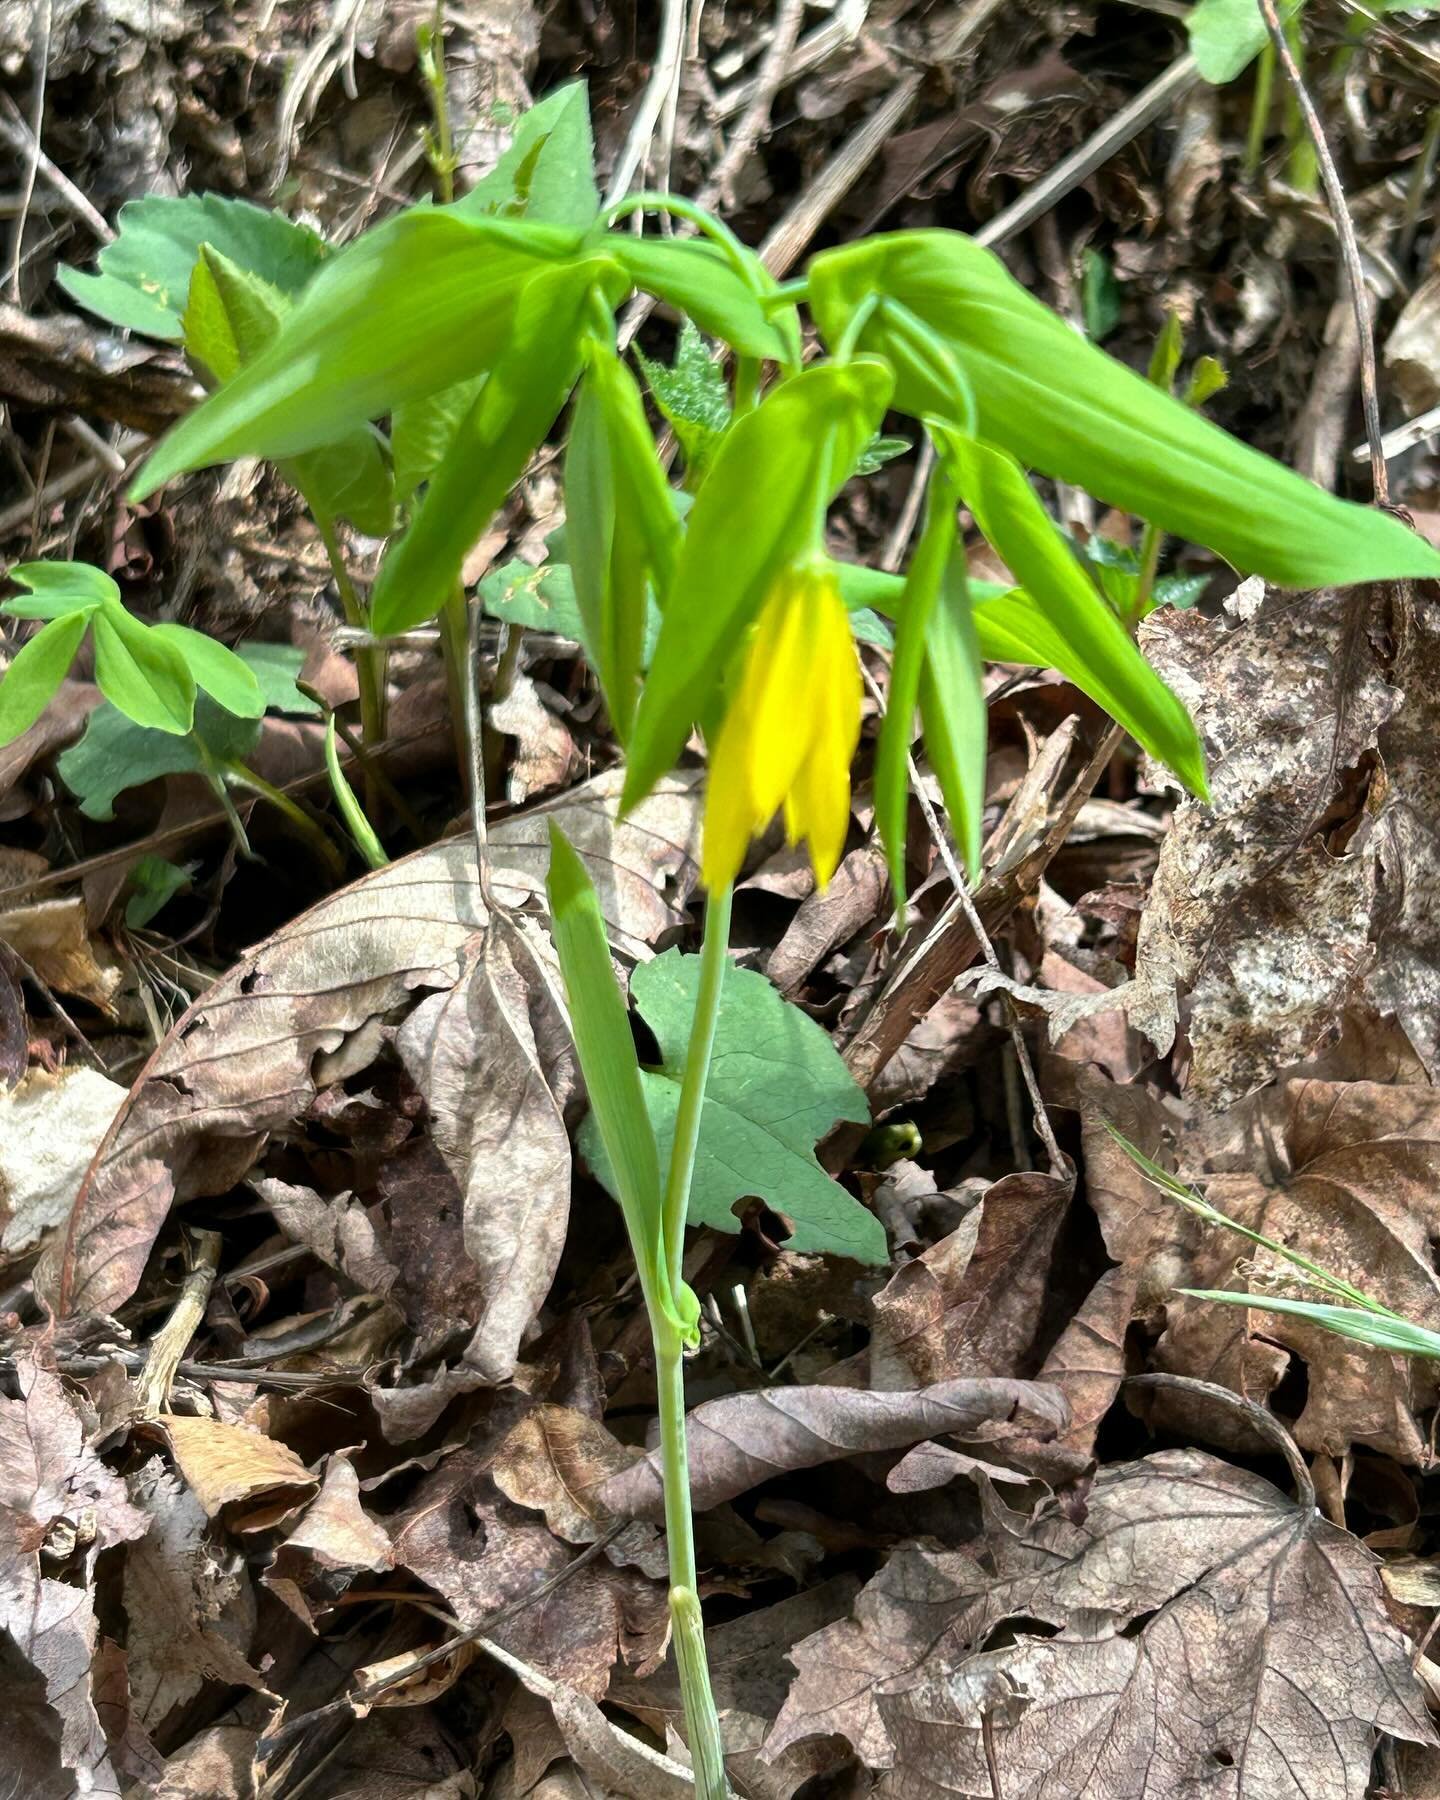 Calling all native gardeners&hellip;. During my hike yesterday I came across three new flowers I&rsquo;ve never seen. Can you help me learn what they&rsquo;re called? #boone #blueridgemountains #ncnativeplants